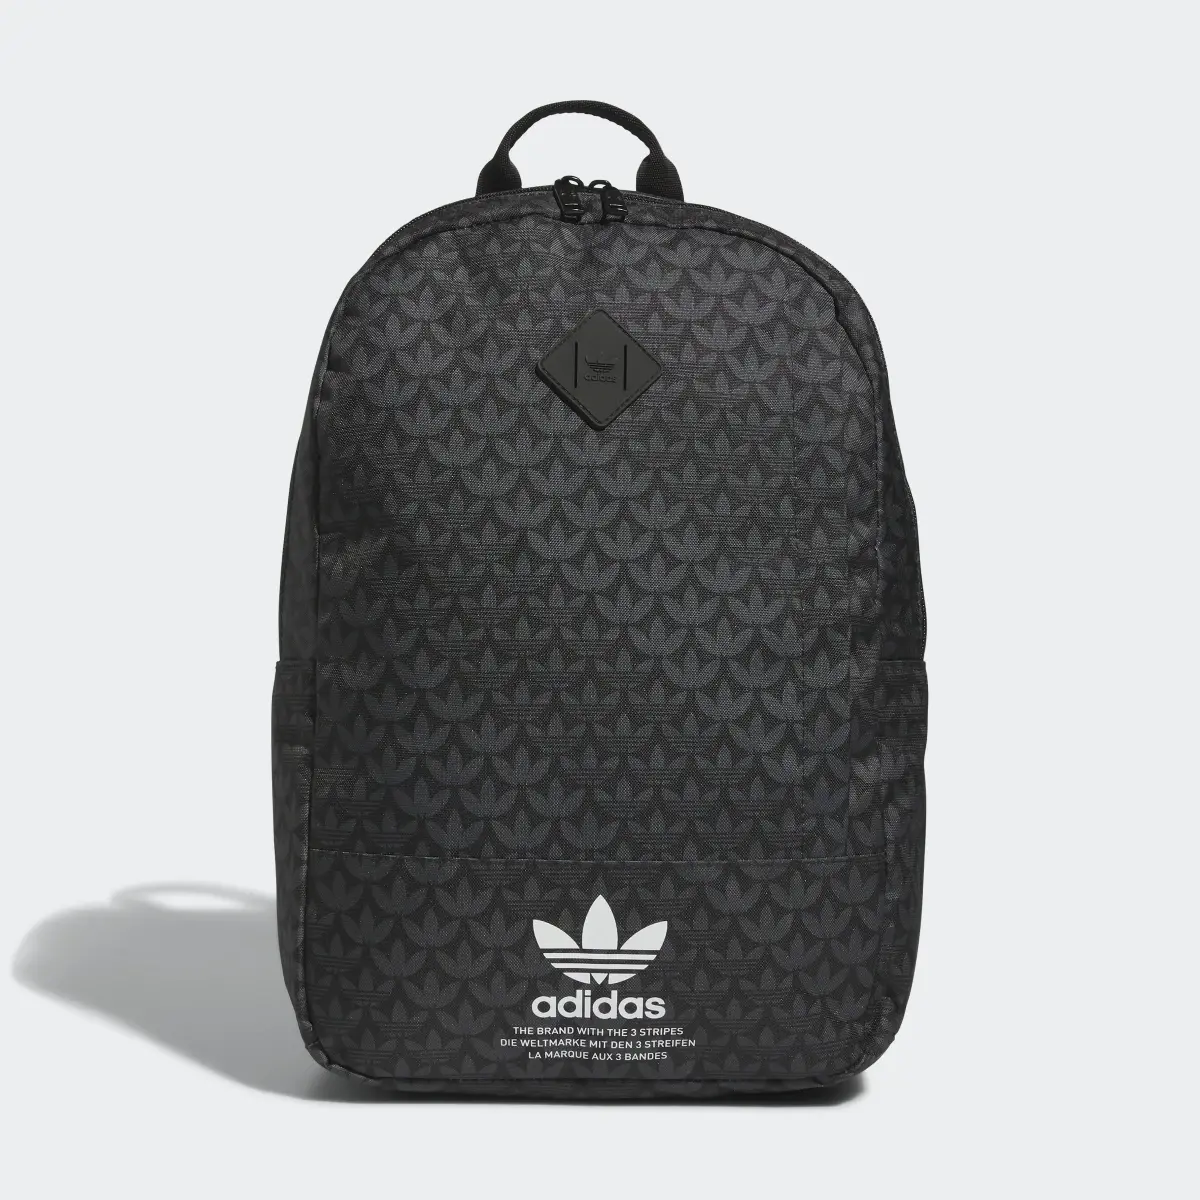 Adidas Graphic Backpack. 2